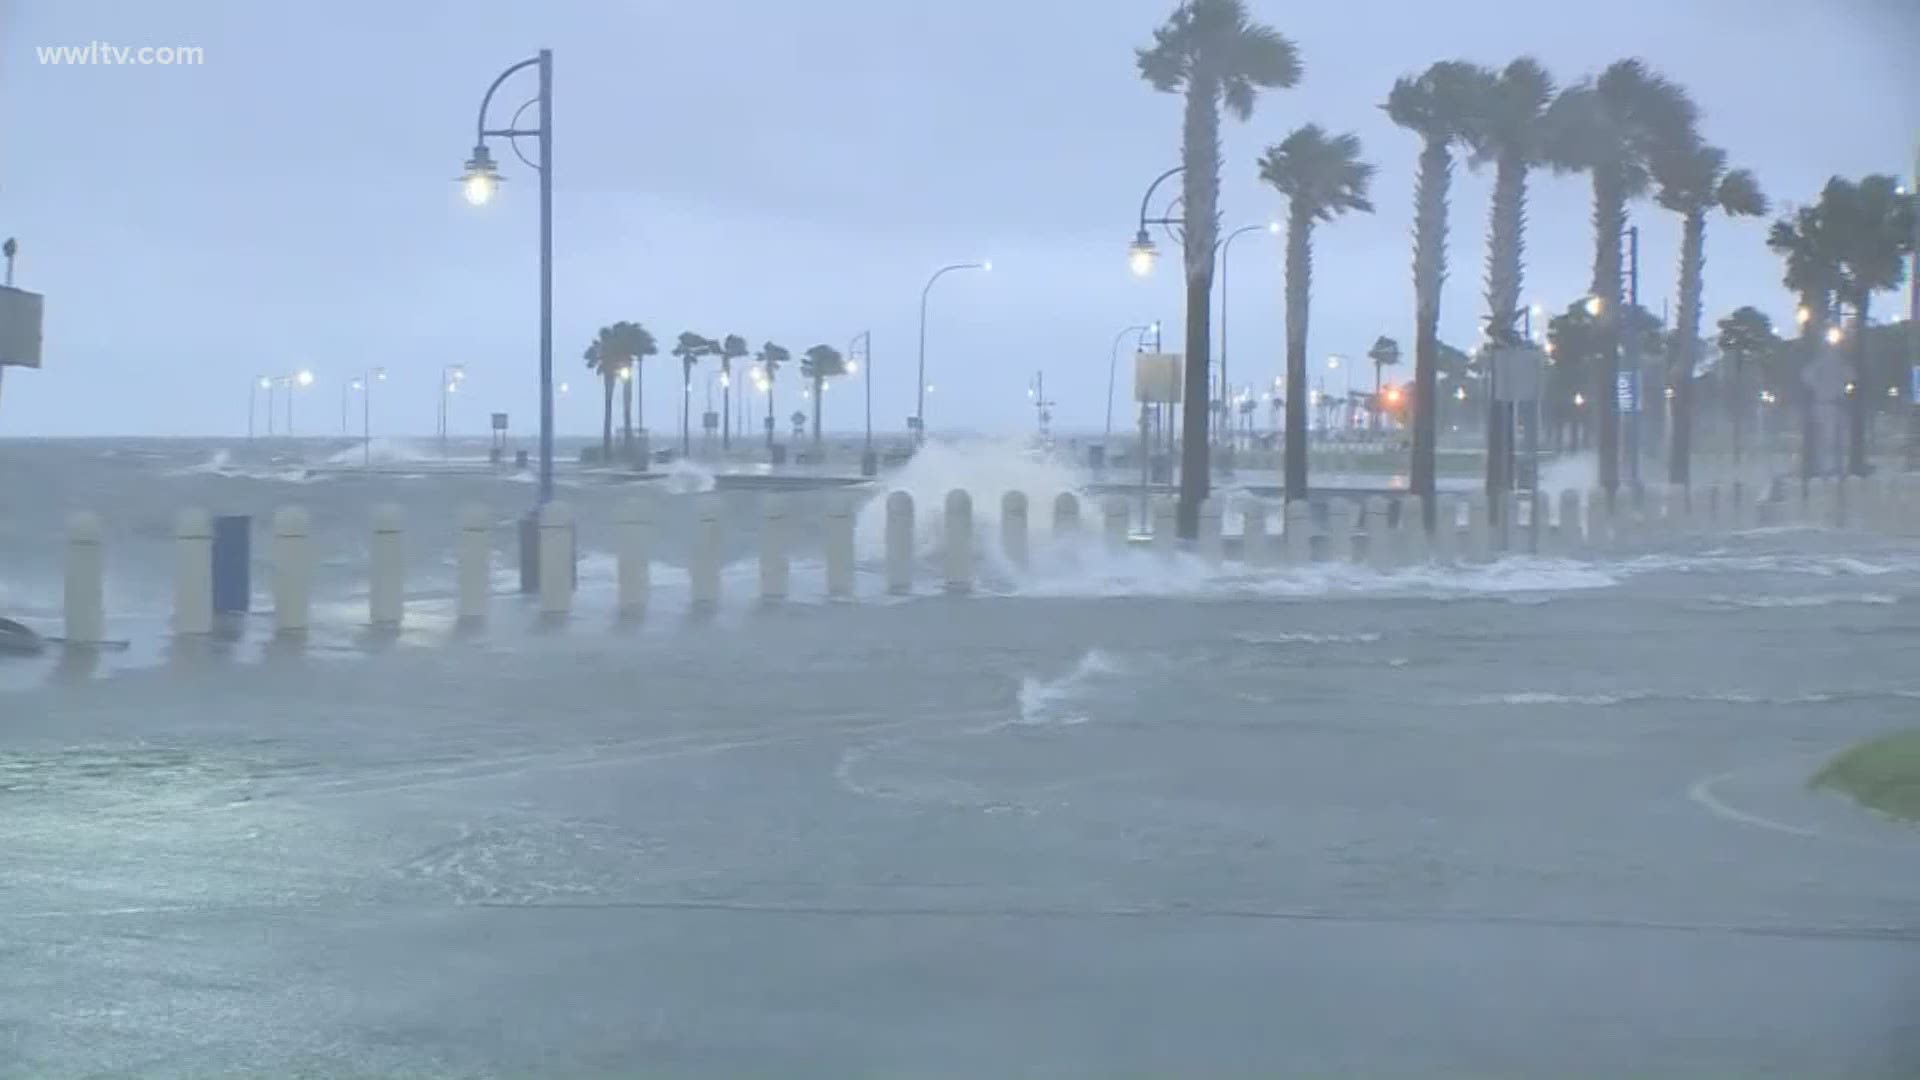 WWL-TV's Danny Monteverde is live from the New Orleans Lakefront Sunday morning, giving us a look at the impacts of Tropical Storm Cristobal so far.